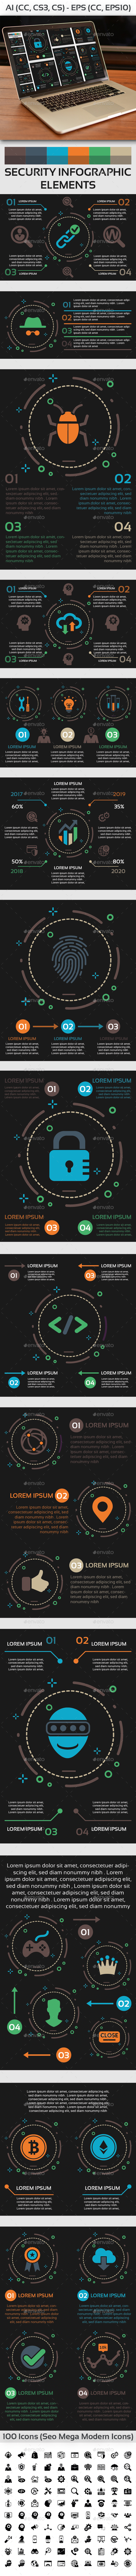 Security Infographic Elements